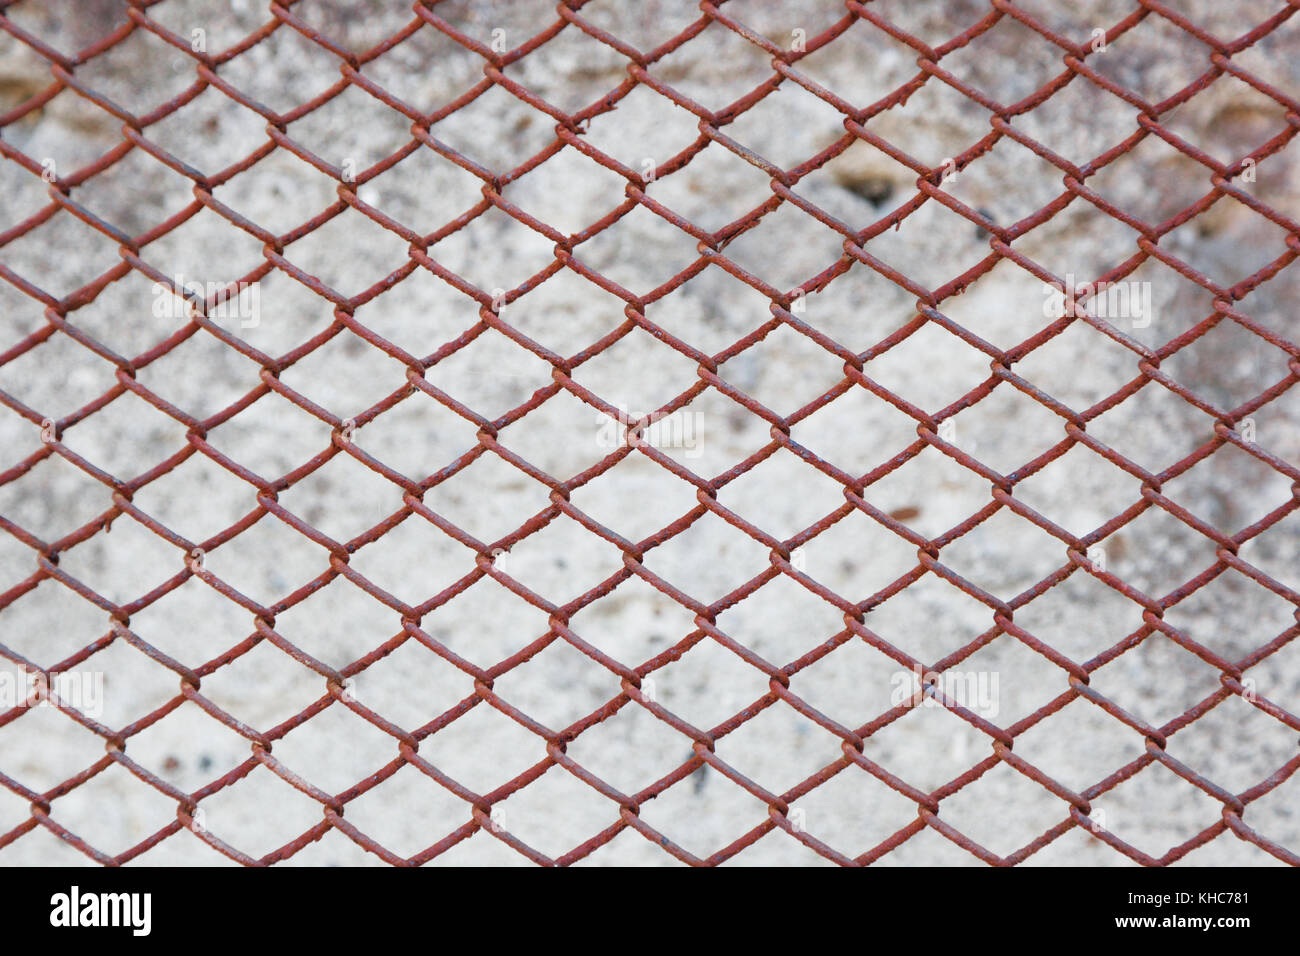 40+ Rusty Fence Crisscross Mesh Stock Photos, Pictures & Royalty